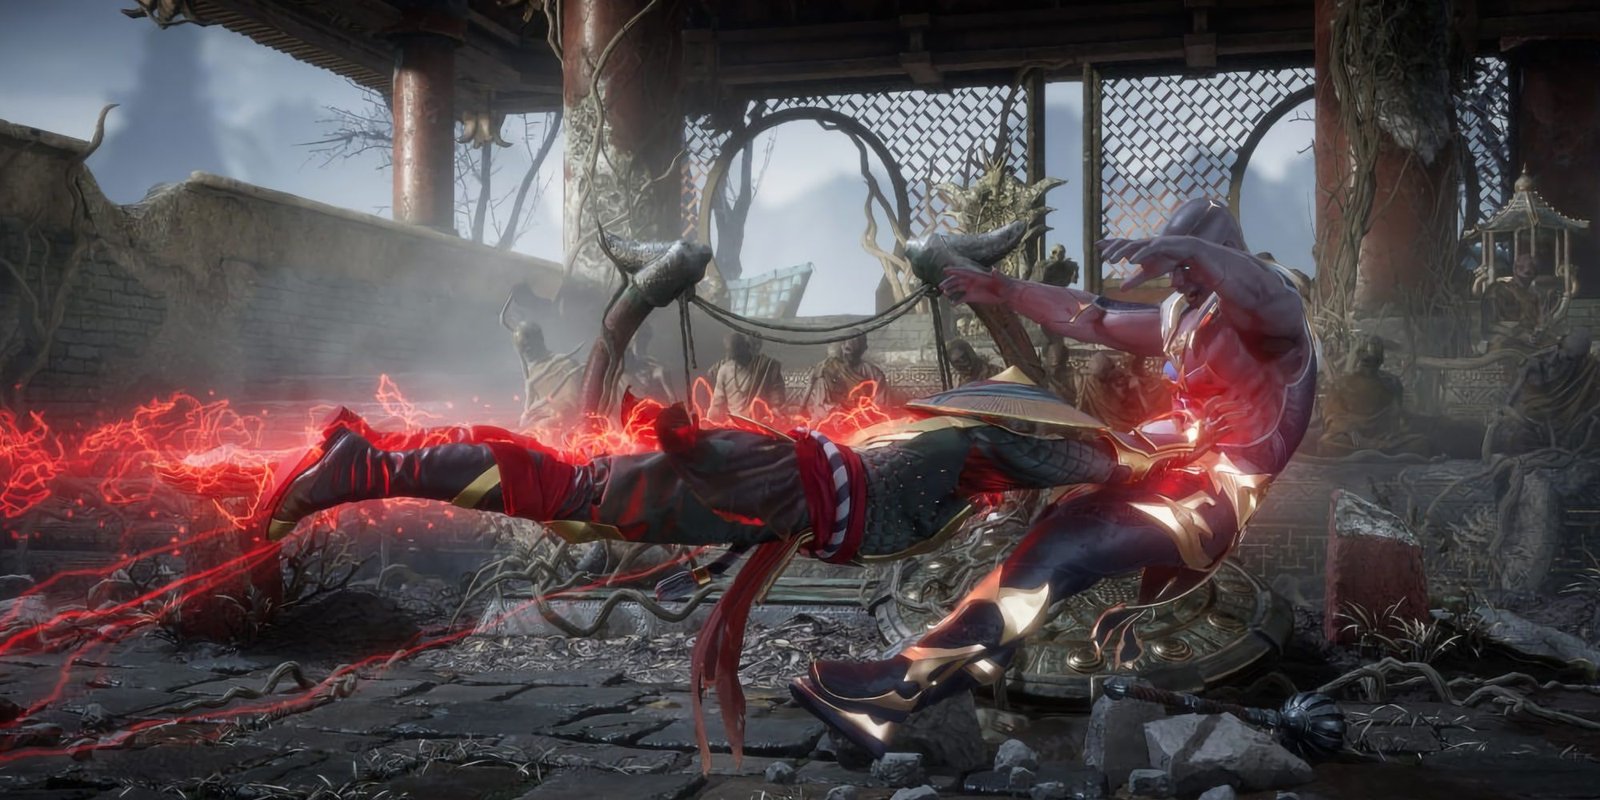 Mortal Kombat 11 - An image of Raiden attacking another fighter.